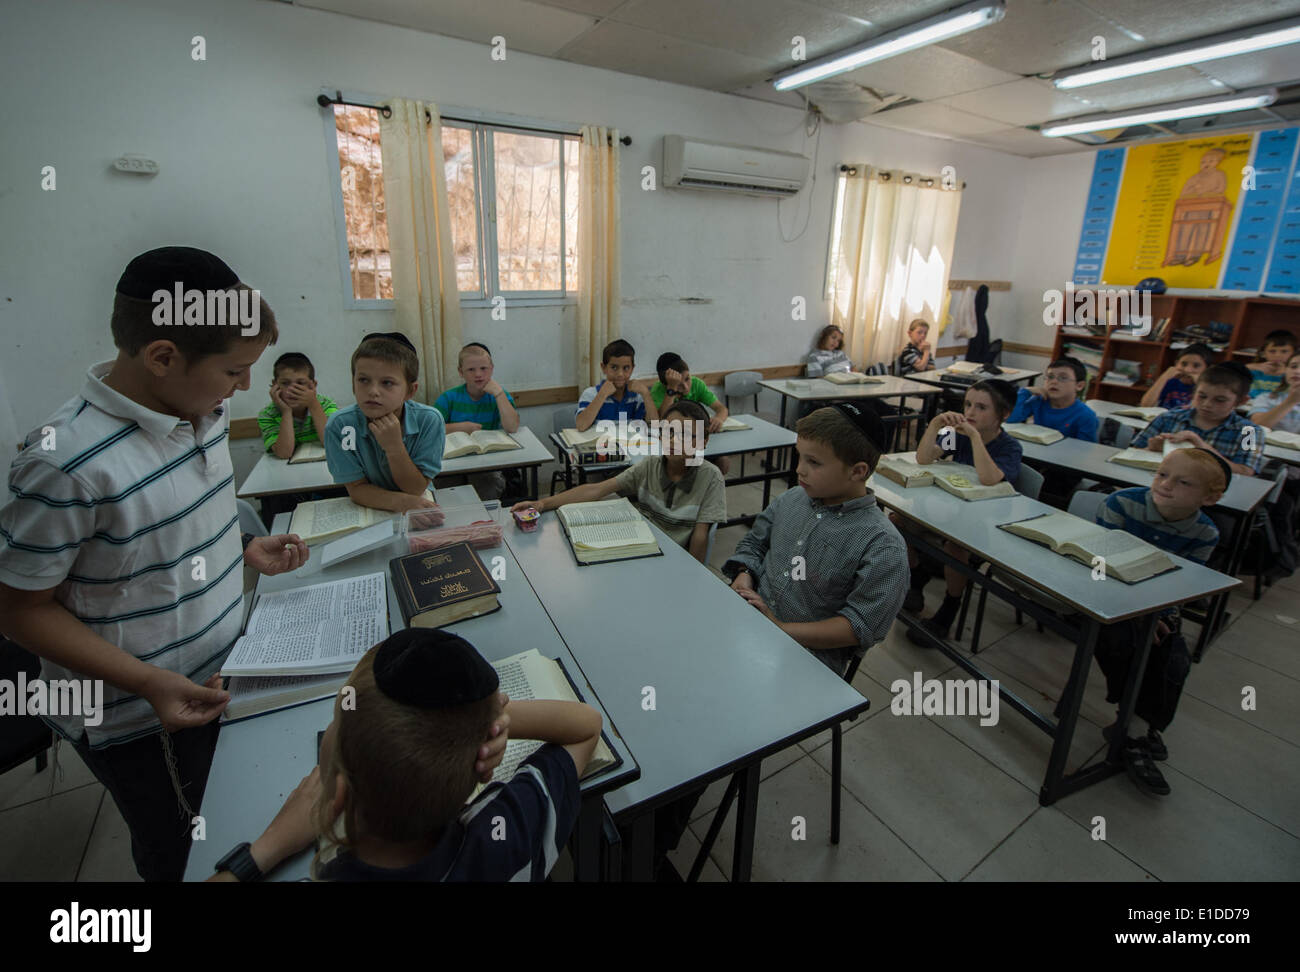 (140601) -- JERUSALEM, June 1, 2014 (Xinhua) -- Tzviel Noyman (1st L) leads a class of Jewish religion at Torat Moshe elementary school in Beit Shemesh, about 20 km from Jerusalem, on May 29, 2014. Tzviel Noyman is an Israeli Ultra-Orthodox boy in a family with six children, three boys and three girls. He is ten years old this year and a grade three pupil of Torat Moshe elementary school, which is only opened to Jewish children. Tzviel has eight classes each day, including Hebrew, English, mathematics and Jewish religion, which has four classes each day including Talmud, Mishnah and Gemara. Tz Stock Photo